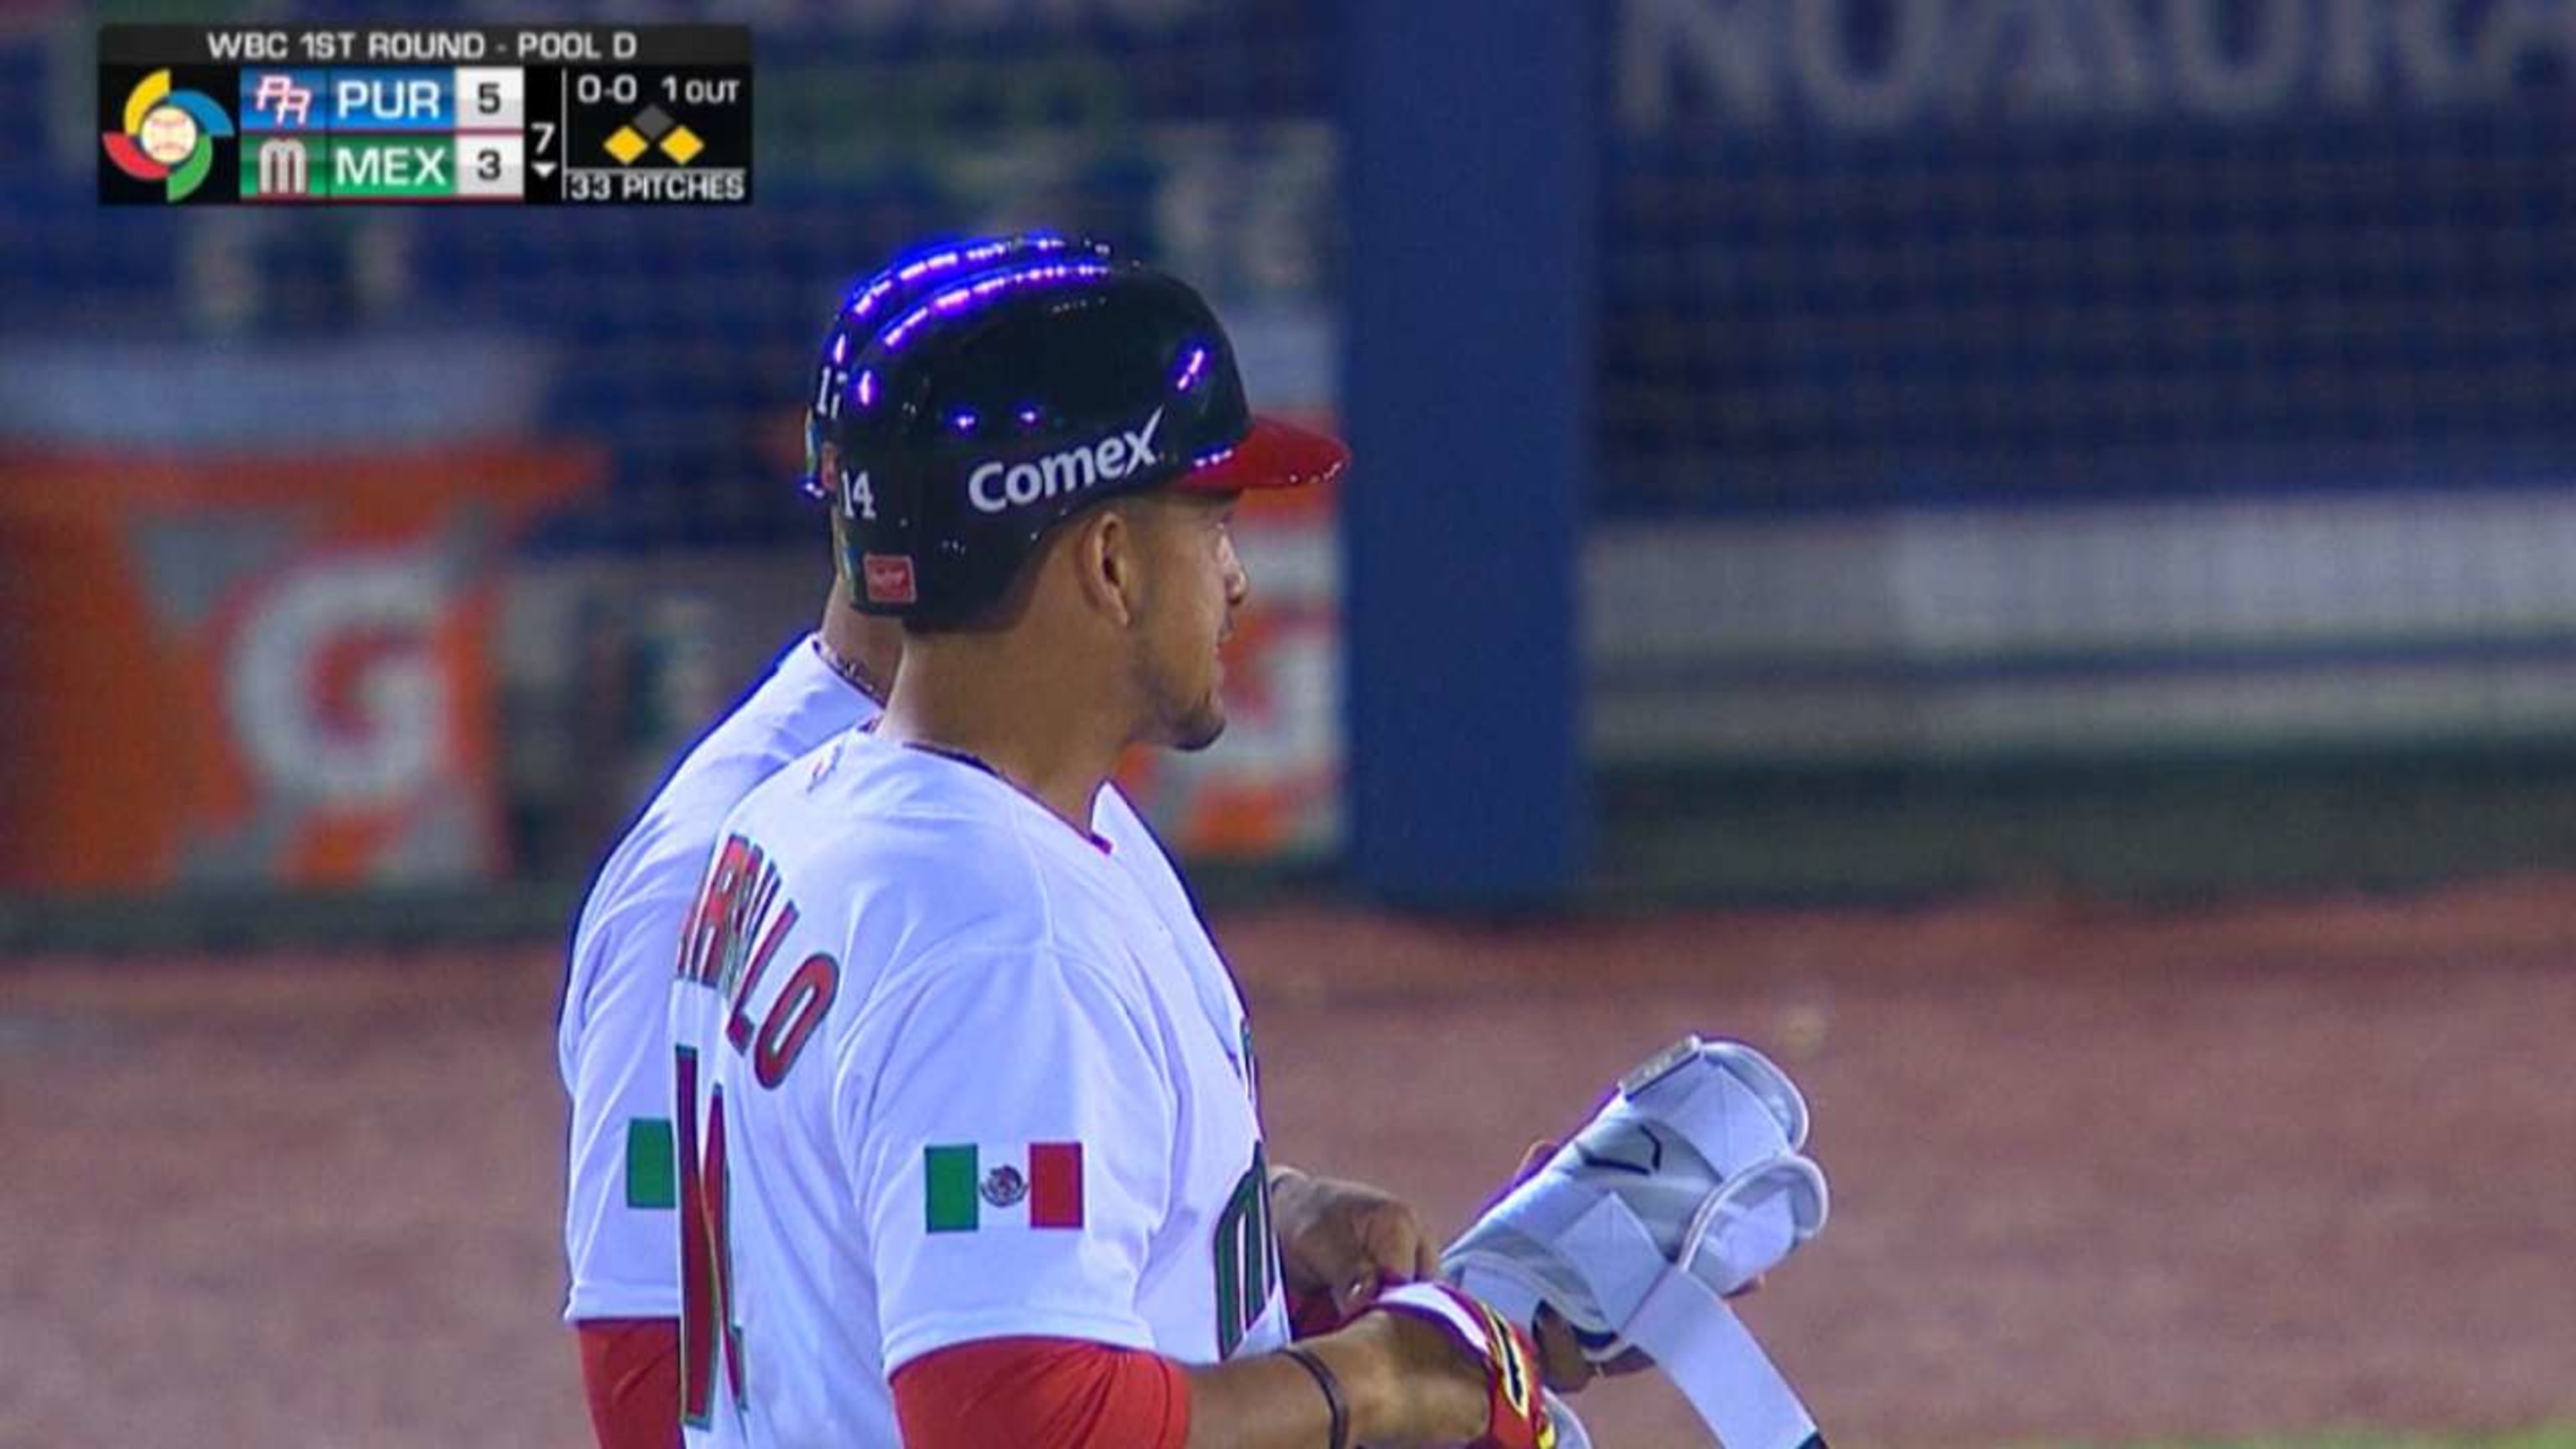 Francisco Lindor's two HRs power Puerto Rico past Mexico in World